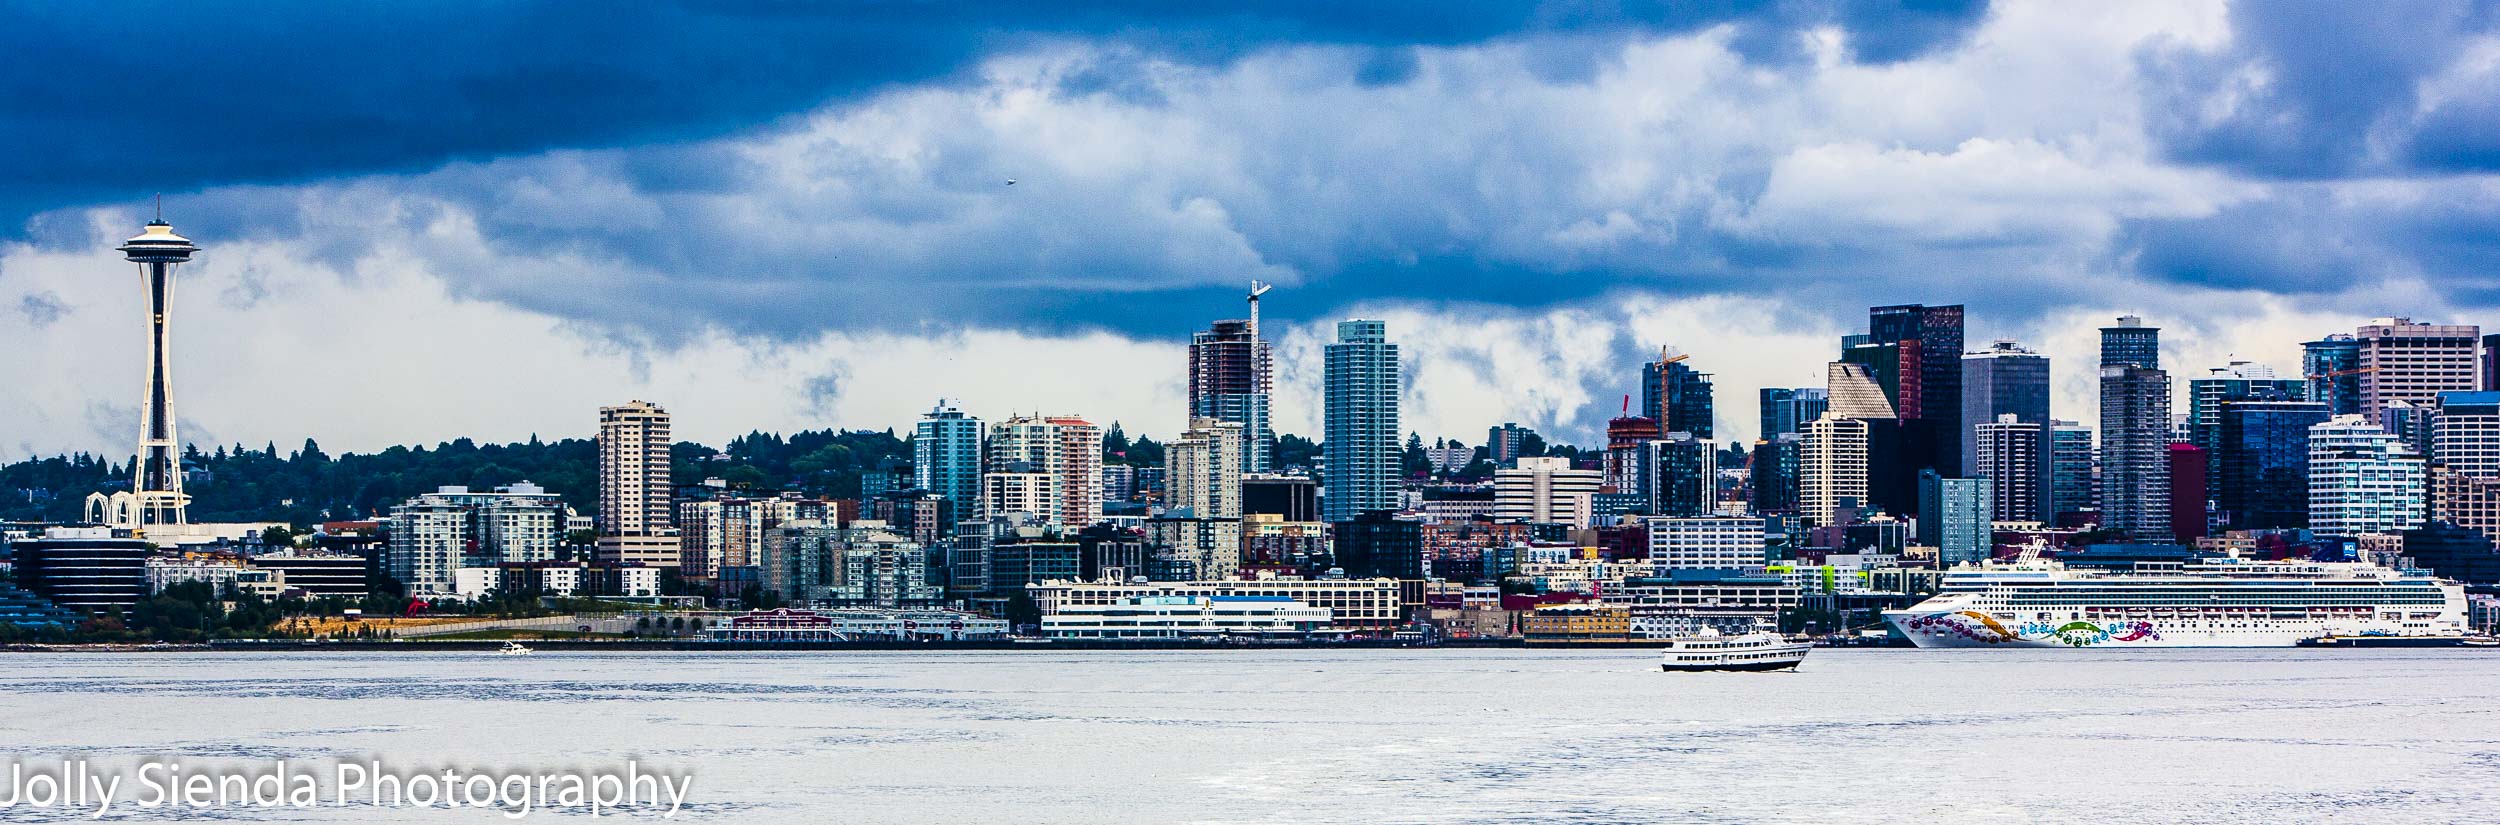 Seattle city skyline from Elliot Bay with the Space Needle and a